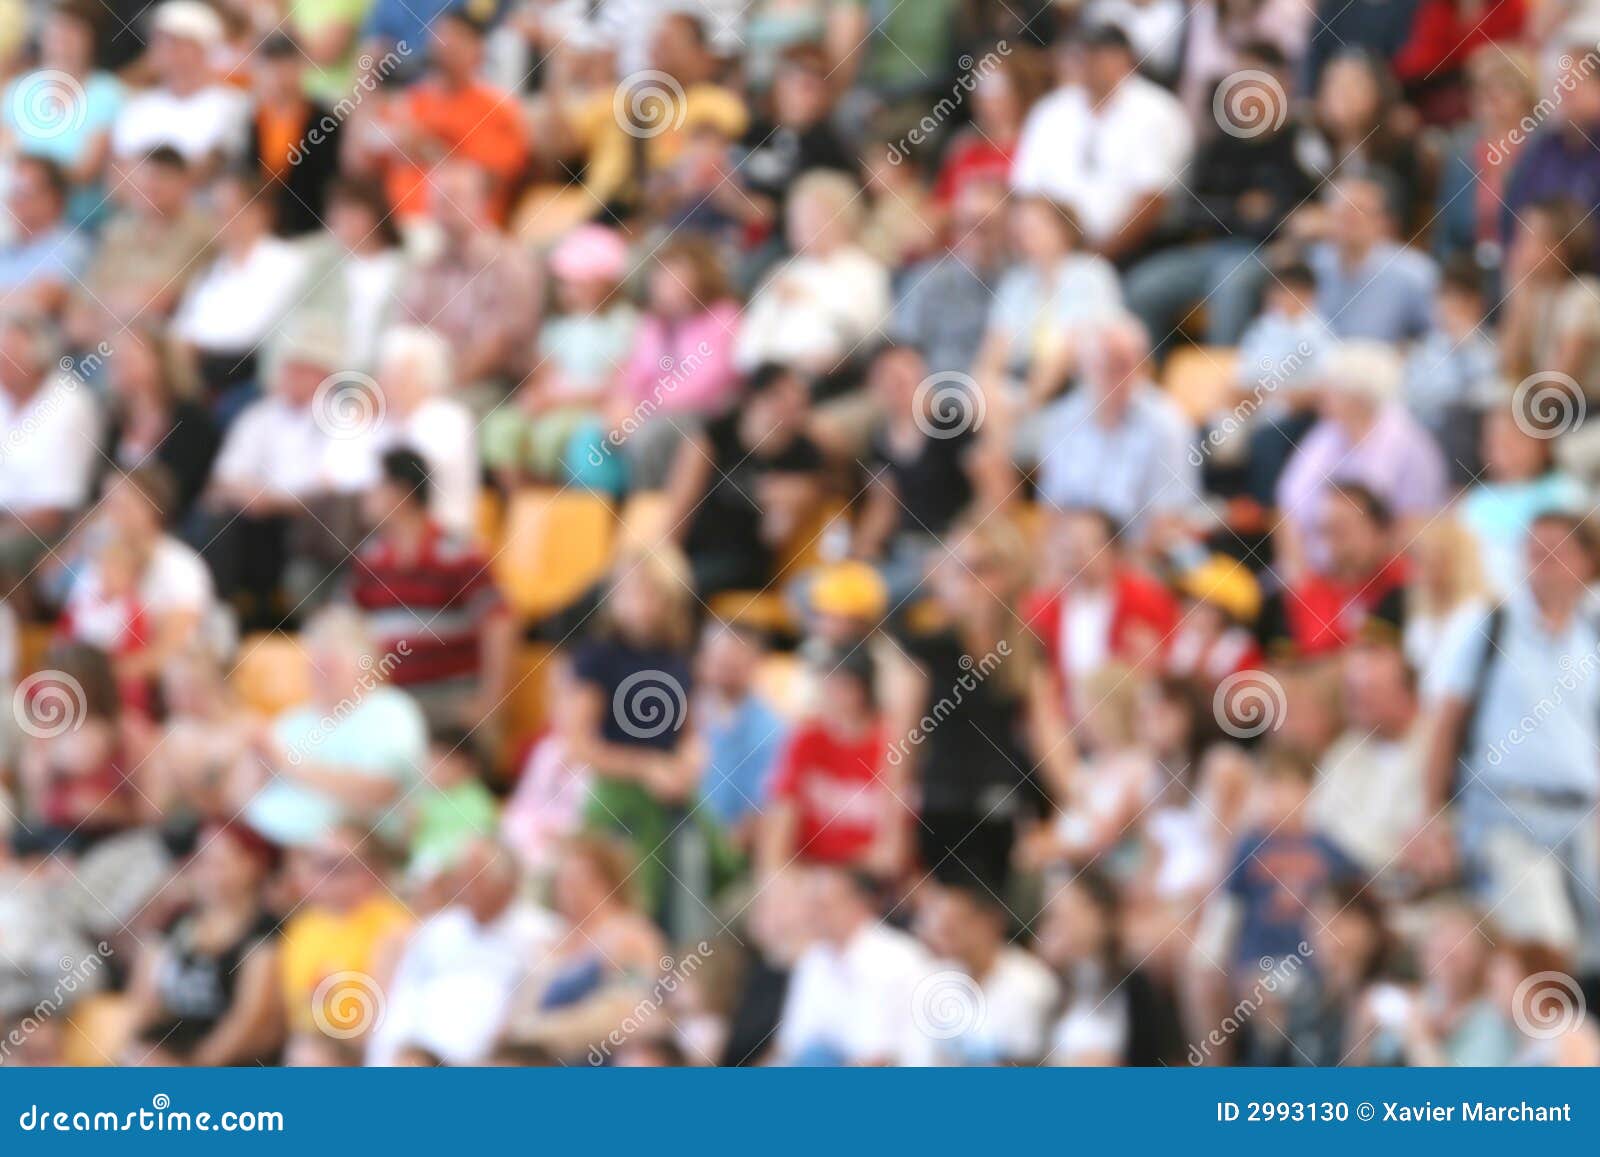 people attending a show